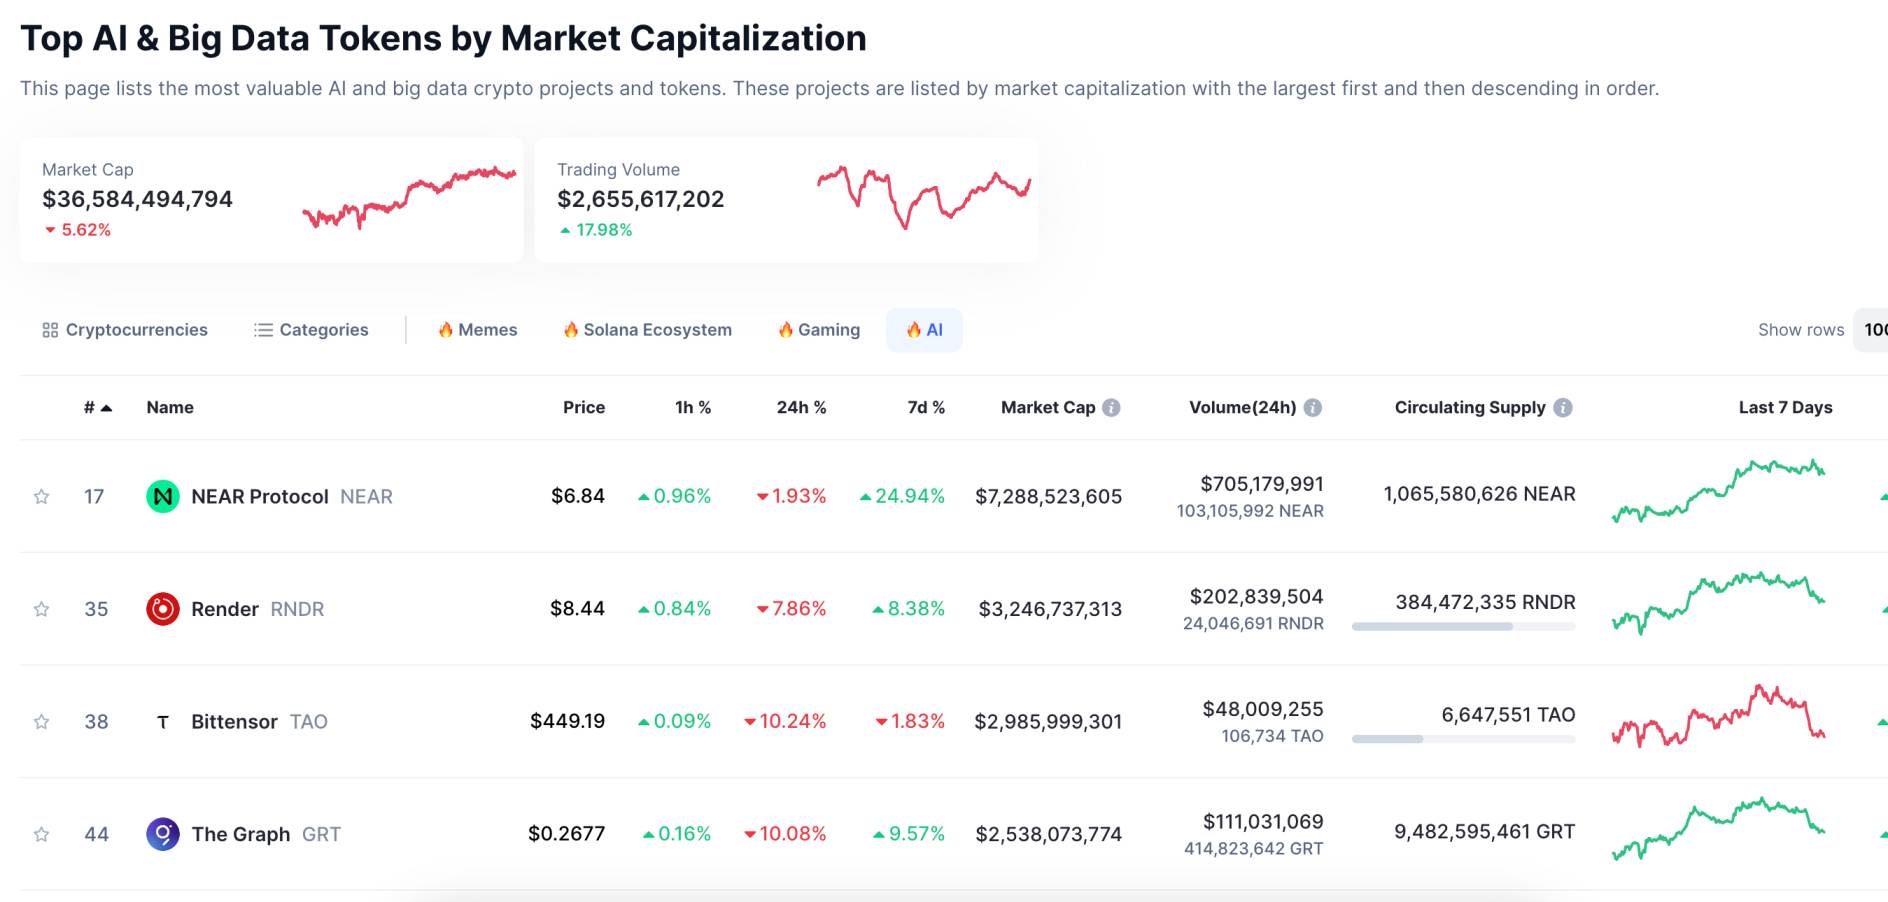 AI coins by market capitalization 